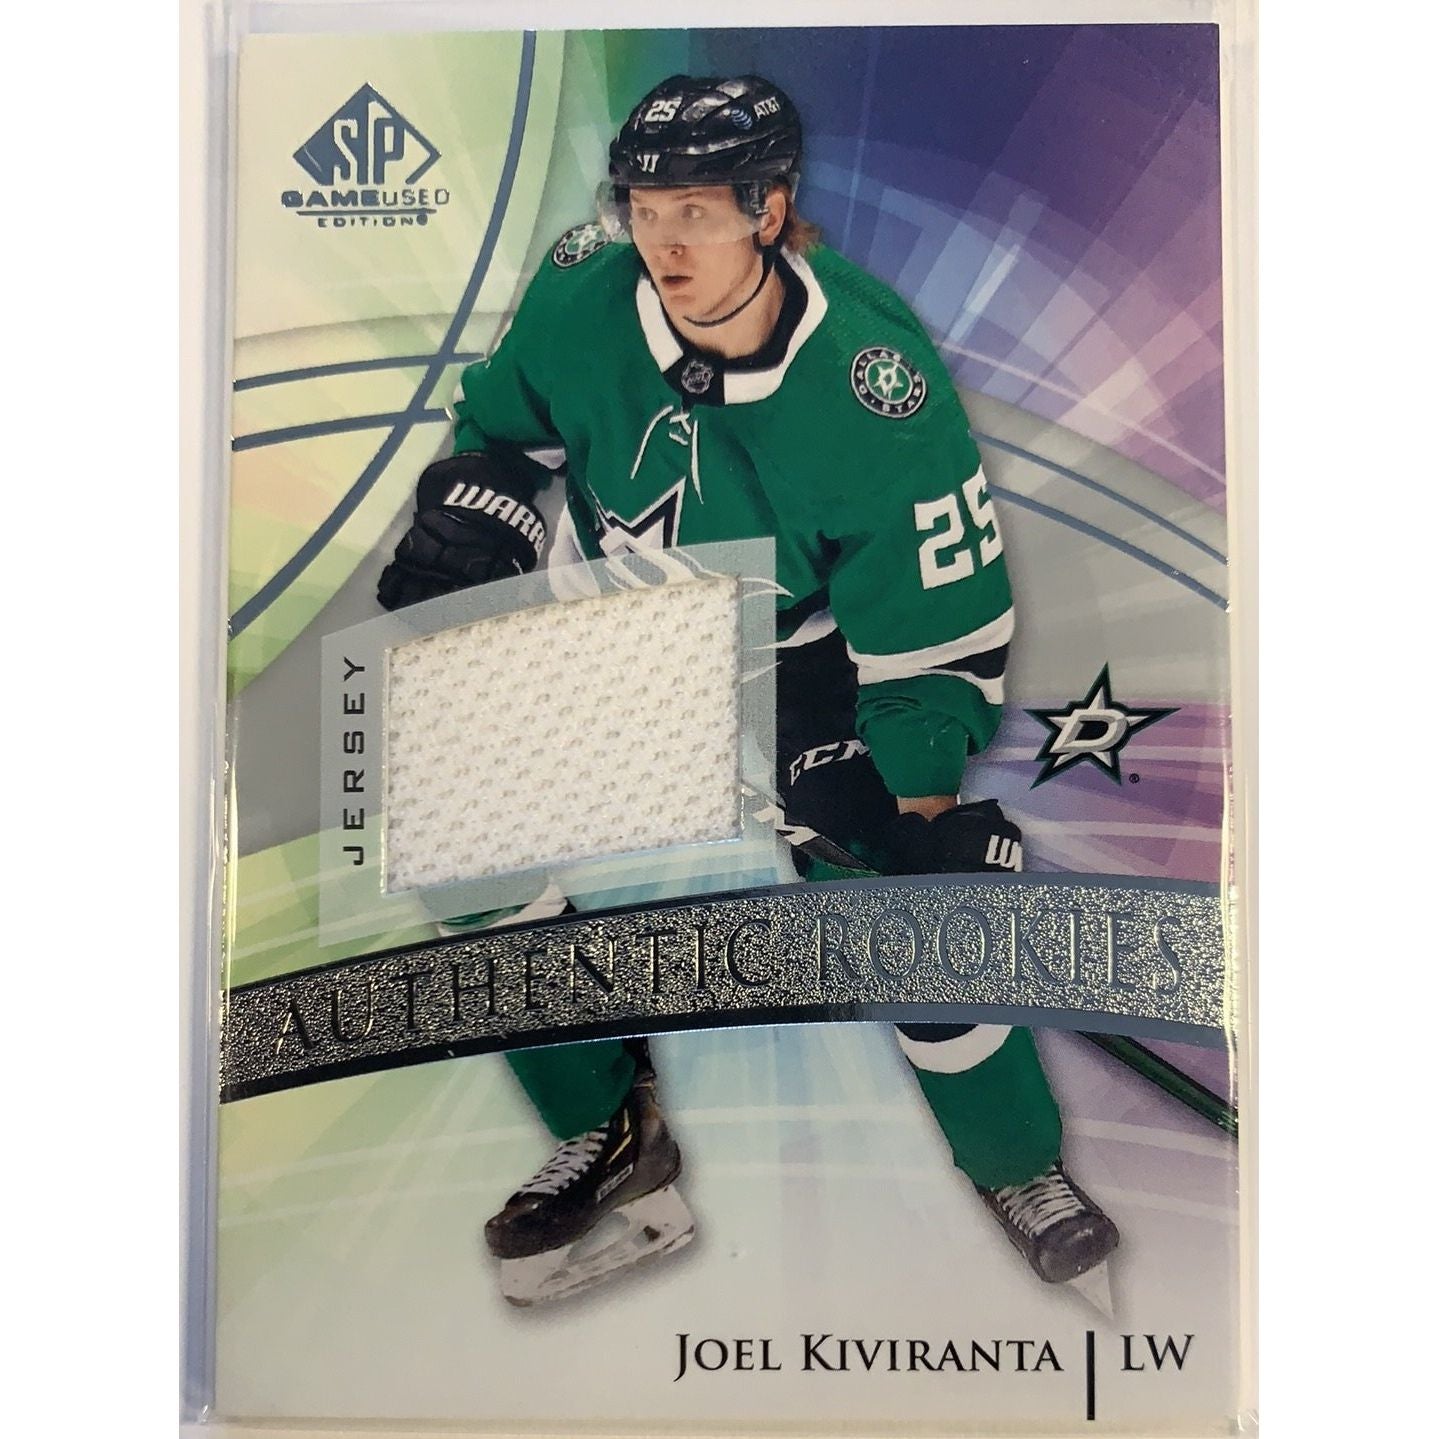  2020-21 SP Game Used Joel Kiviranta Authentic Rookies Patch  Local Legends Cards & Collectibles